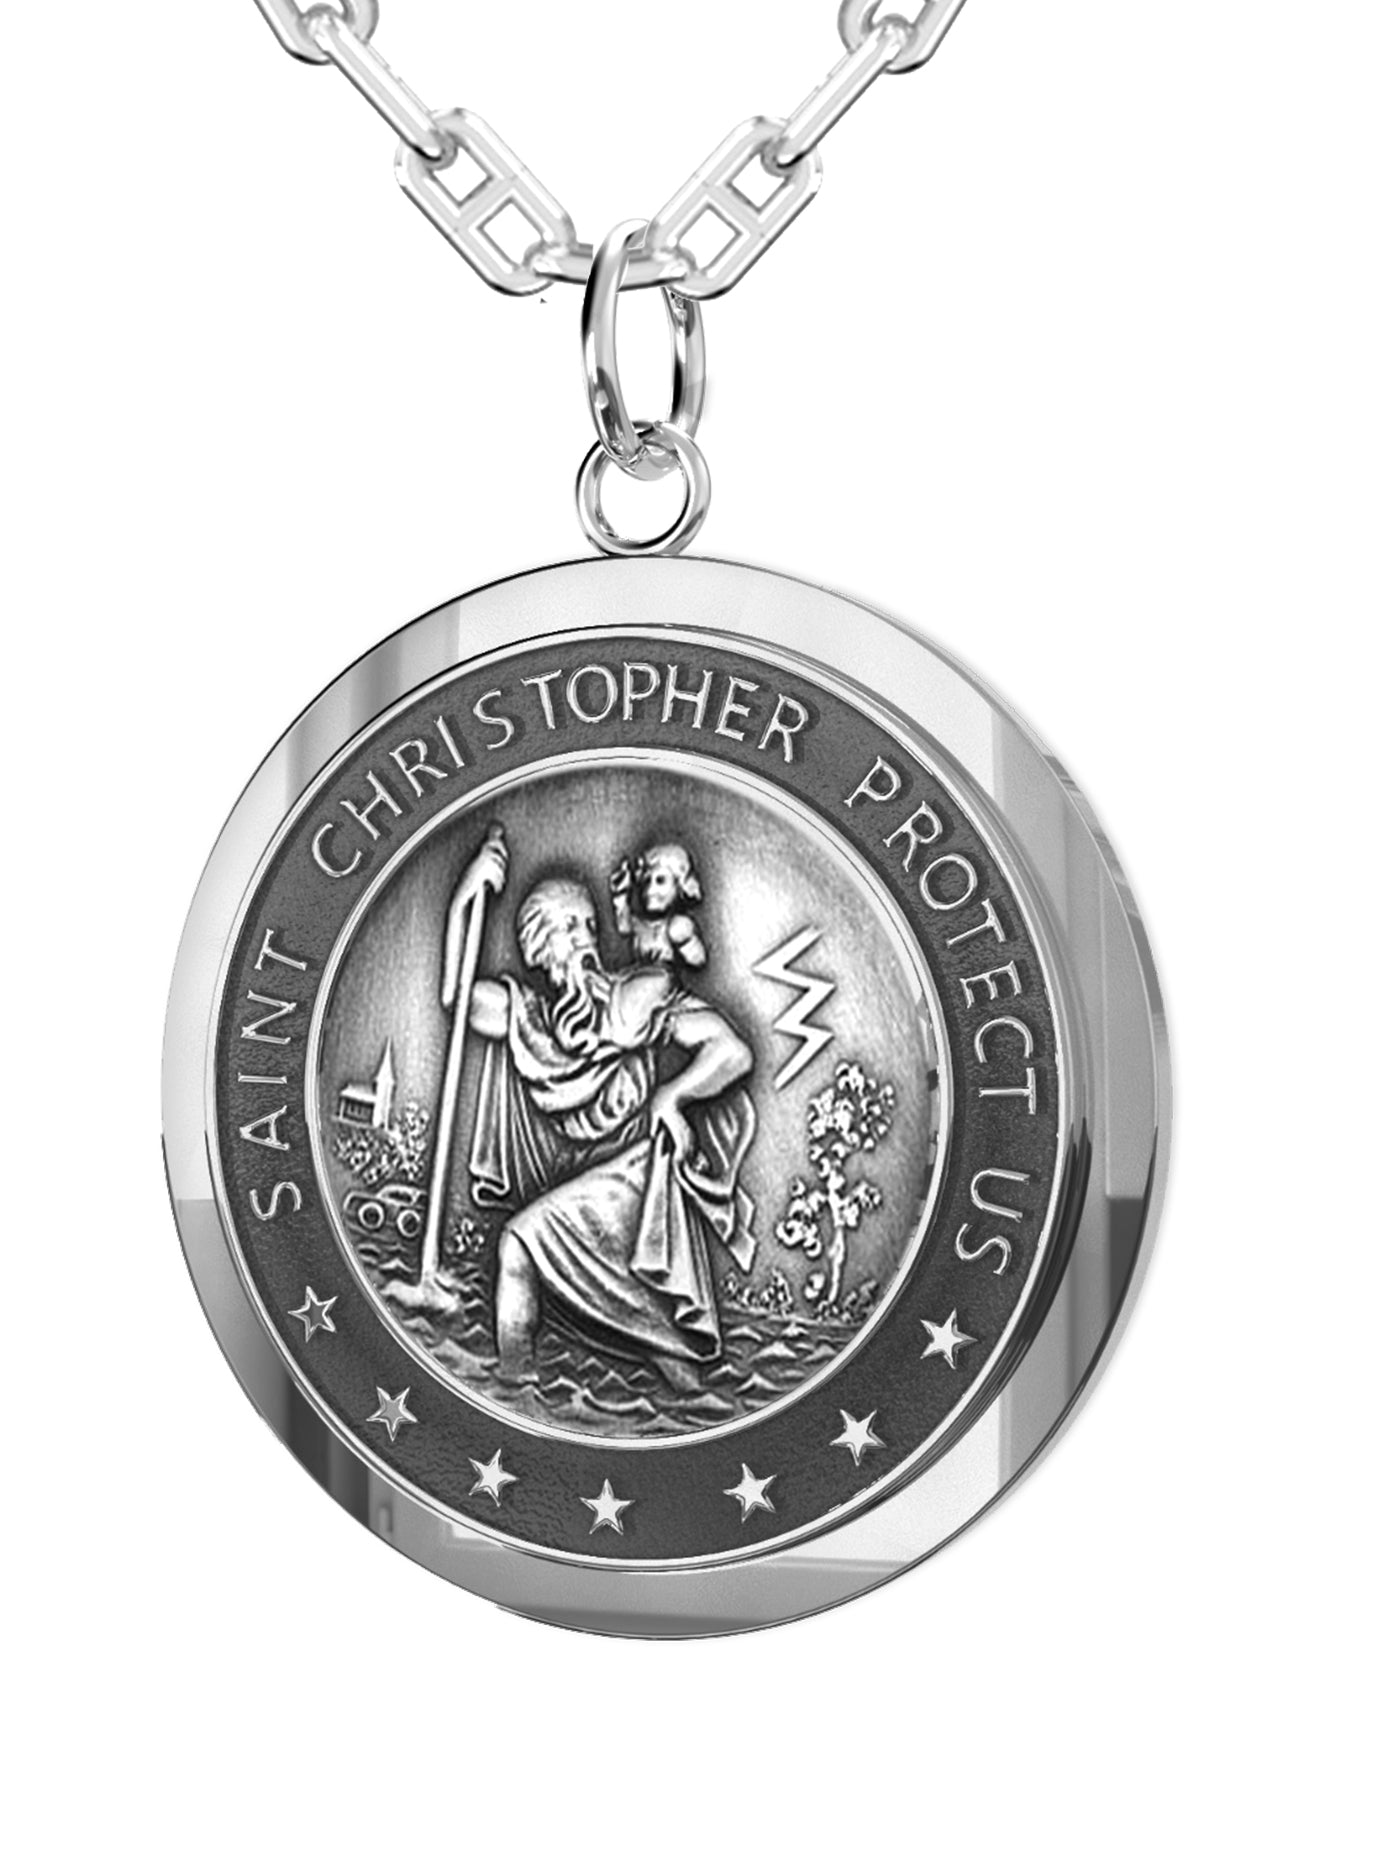 Divine Protection For Travellers - Saint Christopher - Protect Us - Necklace  | eBay